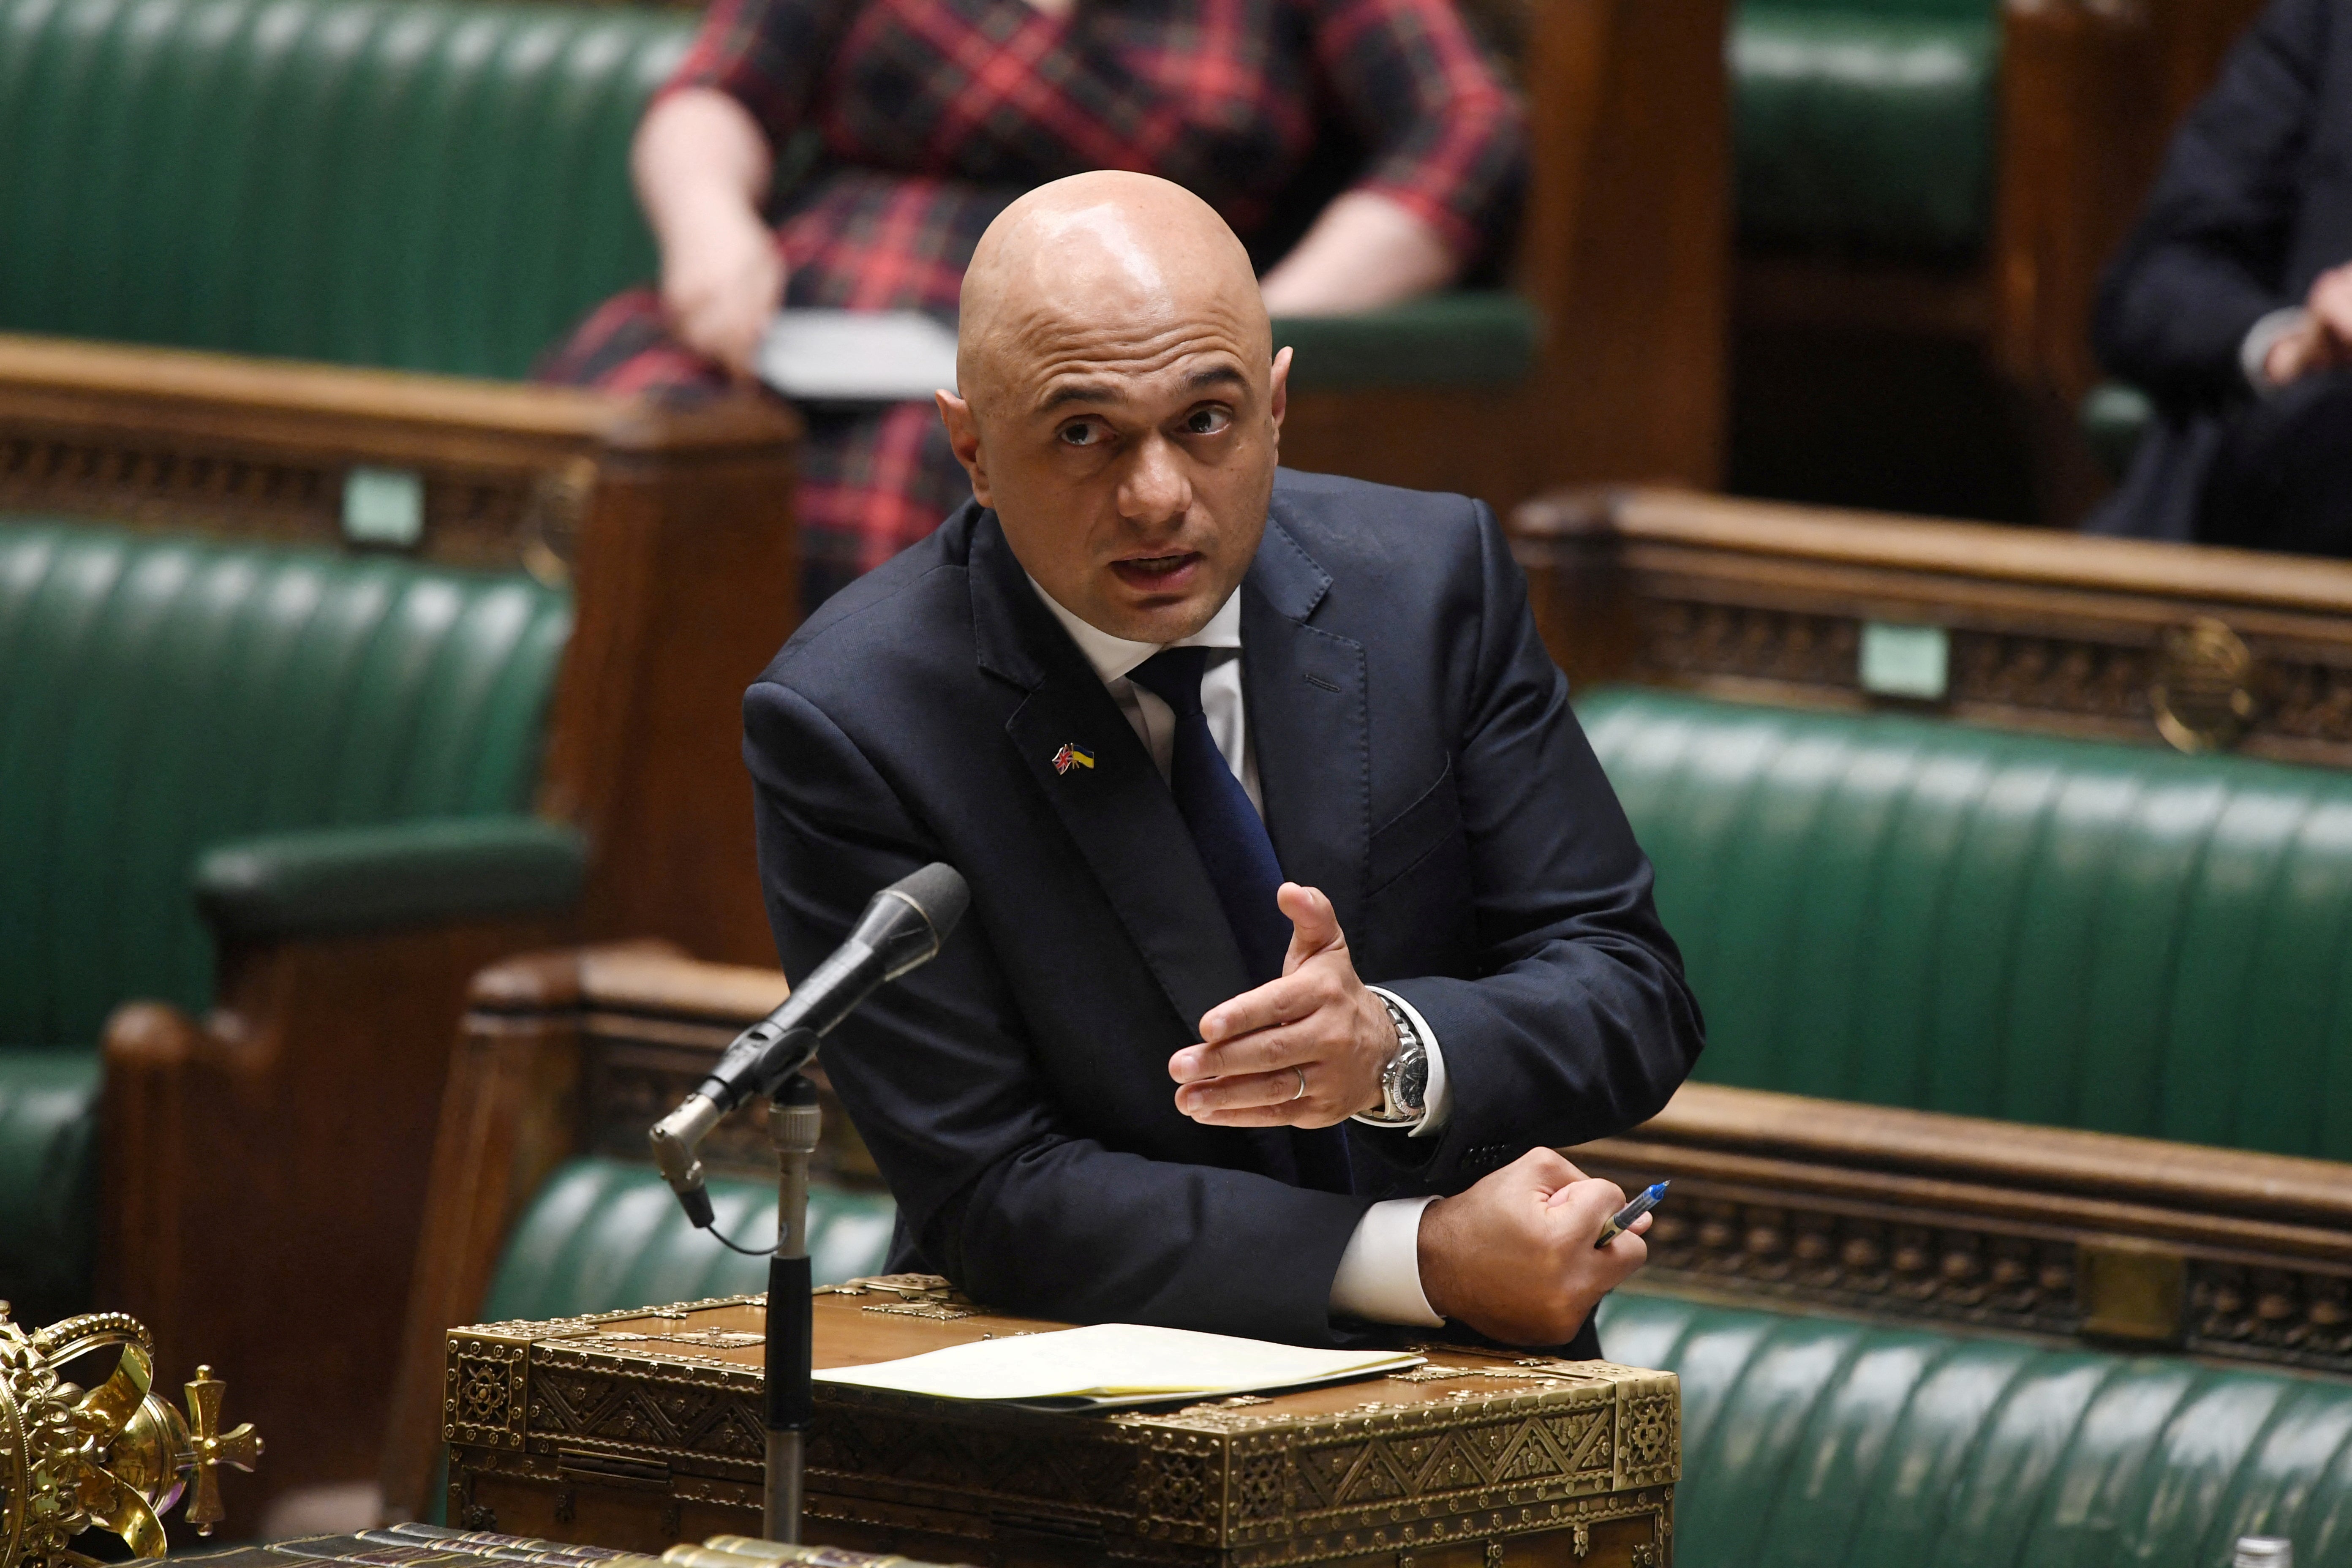 Javid claimed that his non-dom status until 2009, before he entered parliament the following year, was not relevant